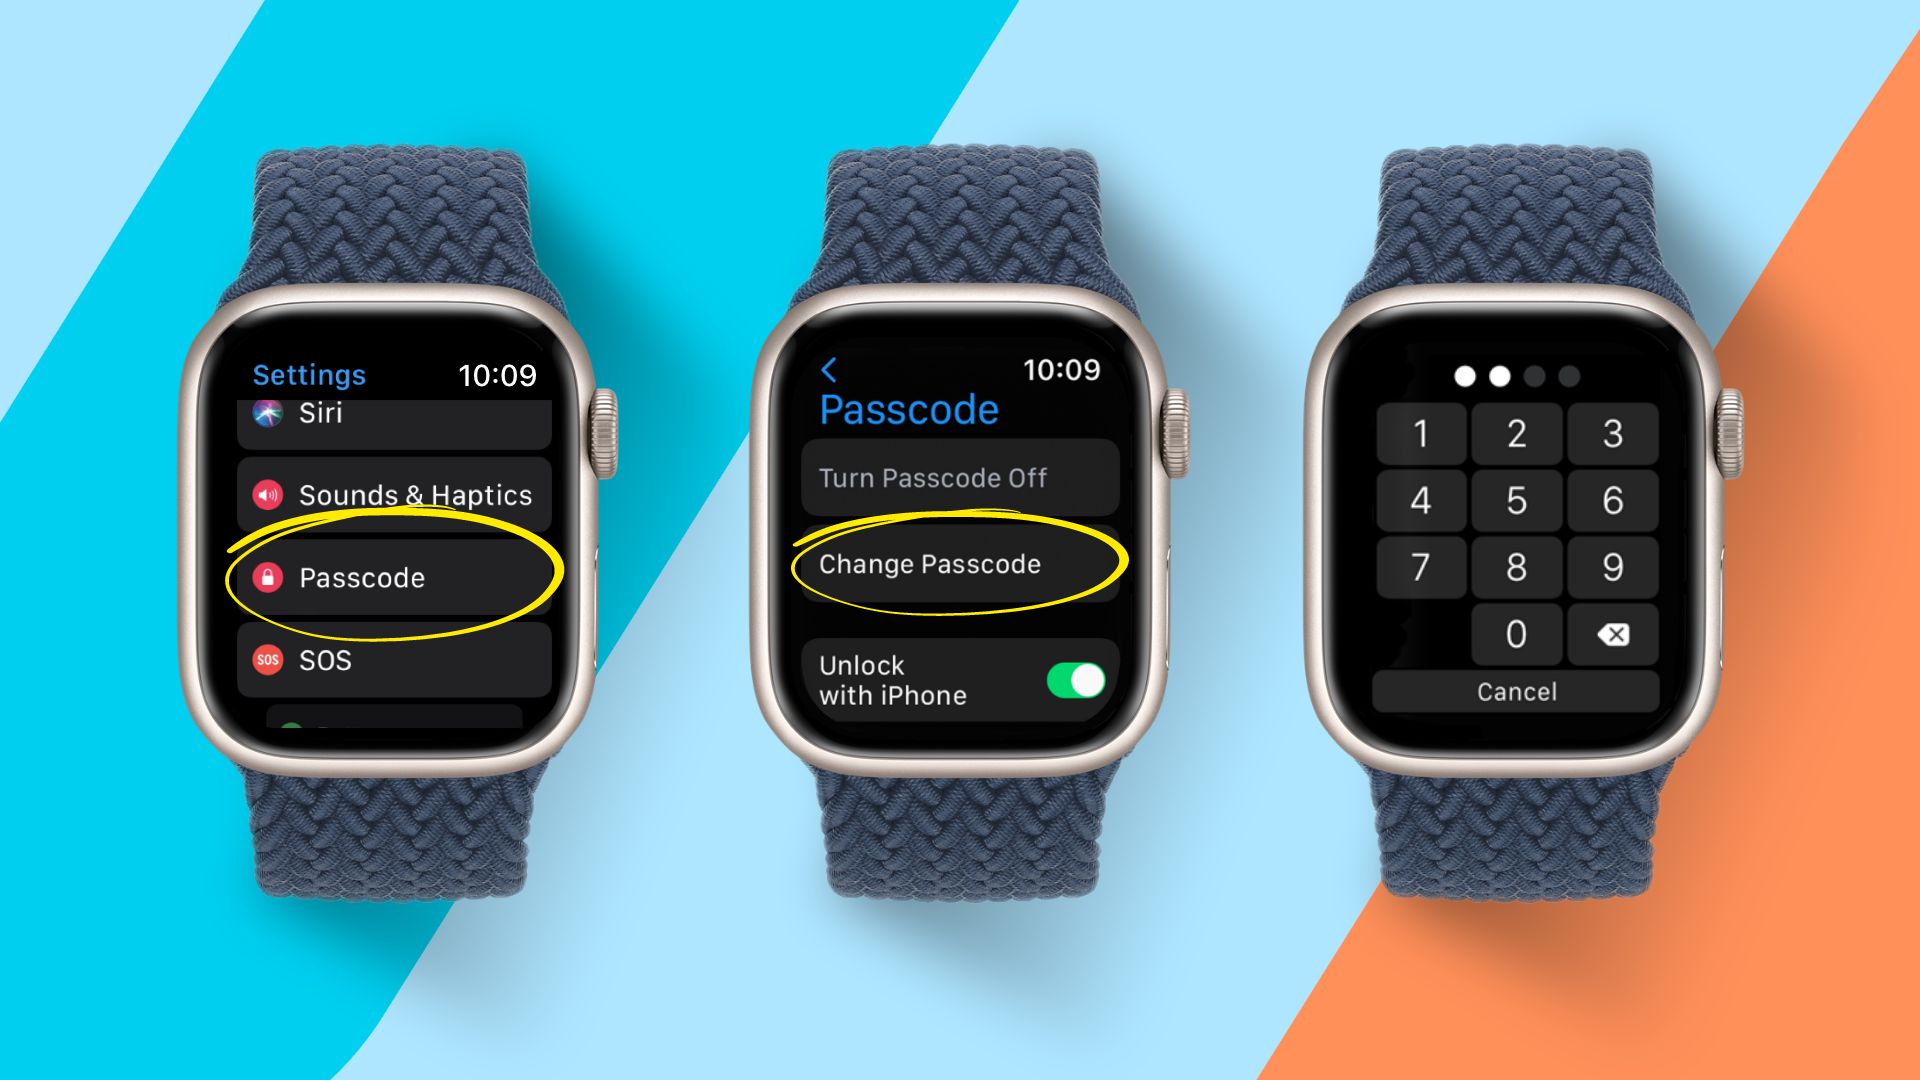 Step-by-step process on how to unlock Apple Watch with a passcode without iPhone